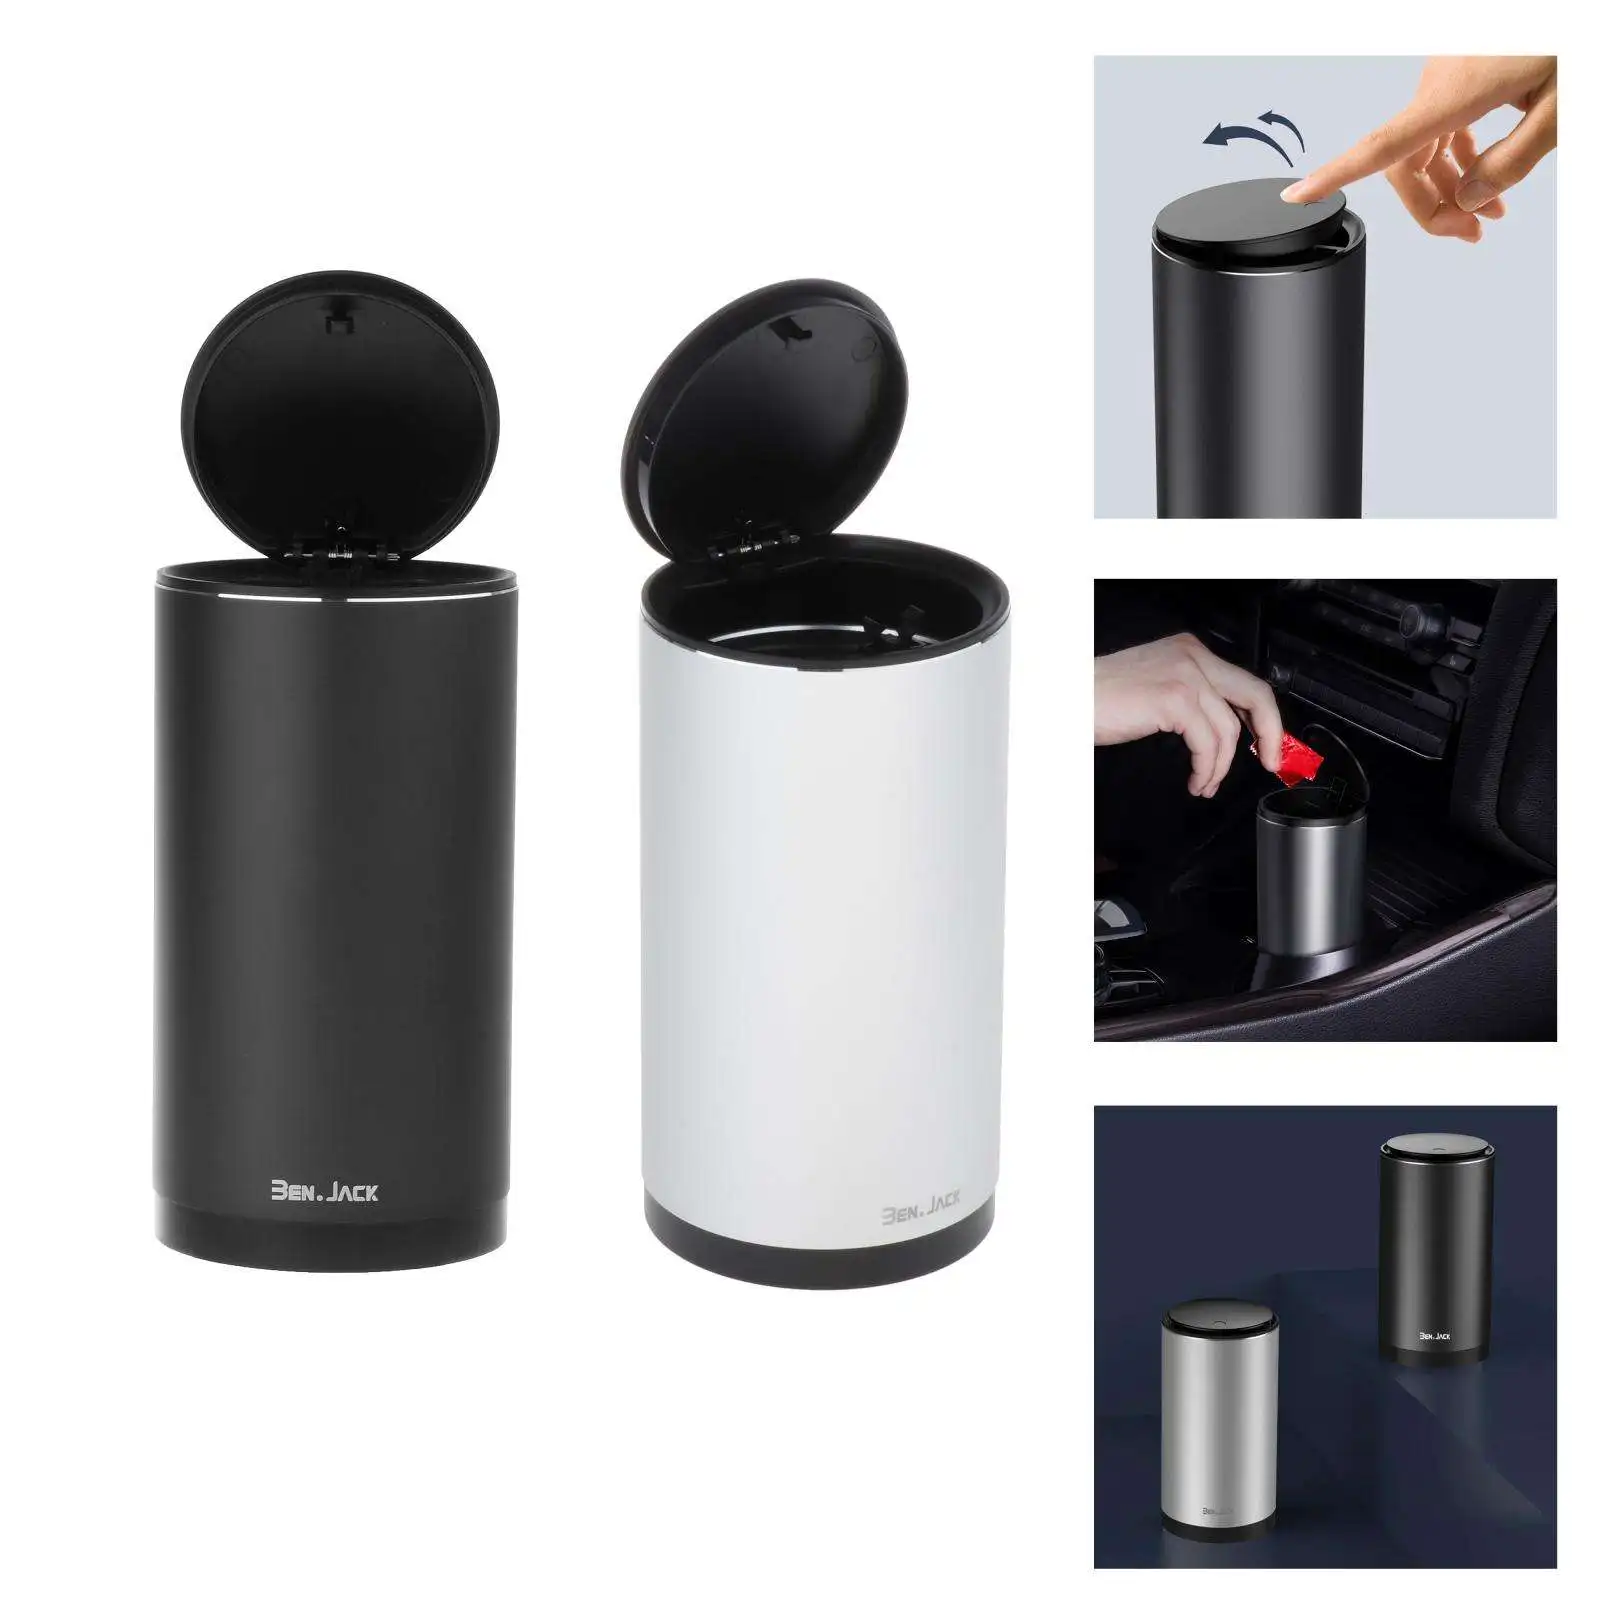 ABS+ Car Trash Can Small Car Trash Bin Portable Vehicle Auto Car Garbage Can Bin Trash Container for Indoor Outdoor